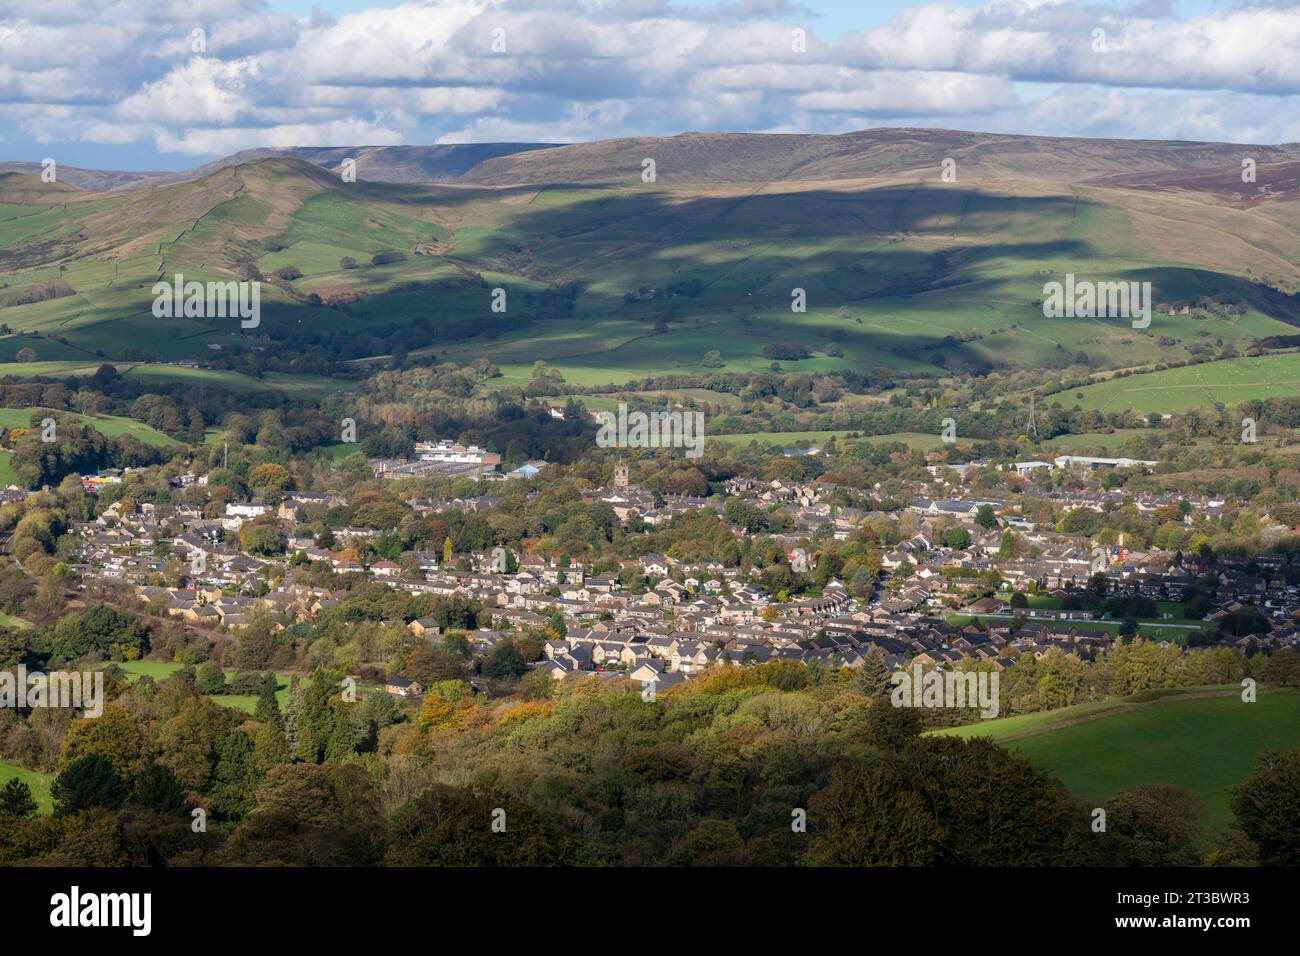 The town of Chapel-en-le-Frith seen from Combs Edge in Derbyshire, England. Stock Photo